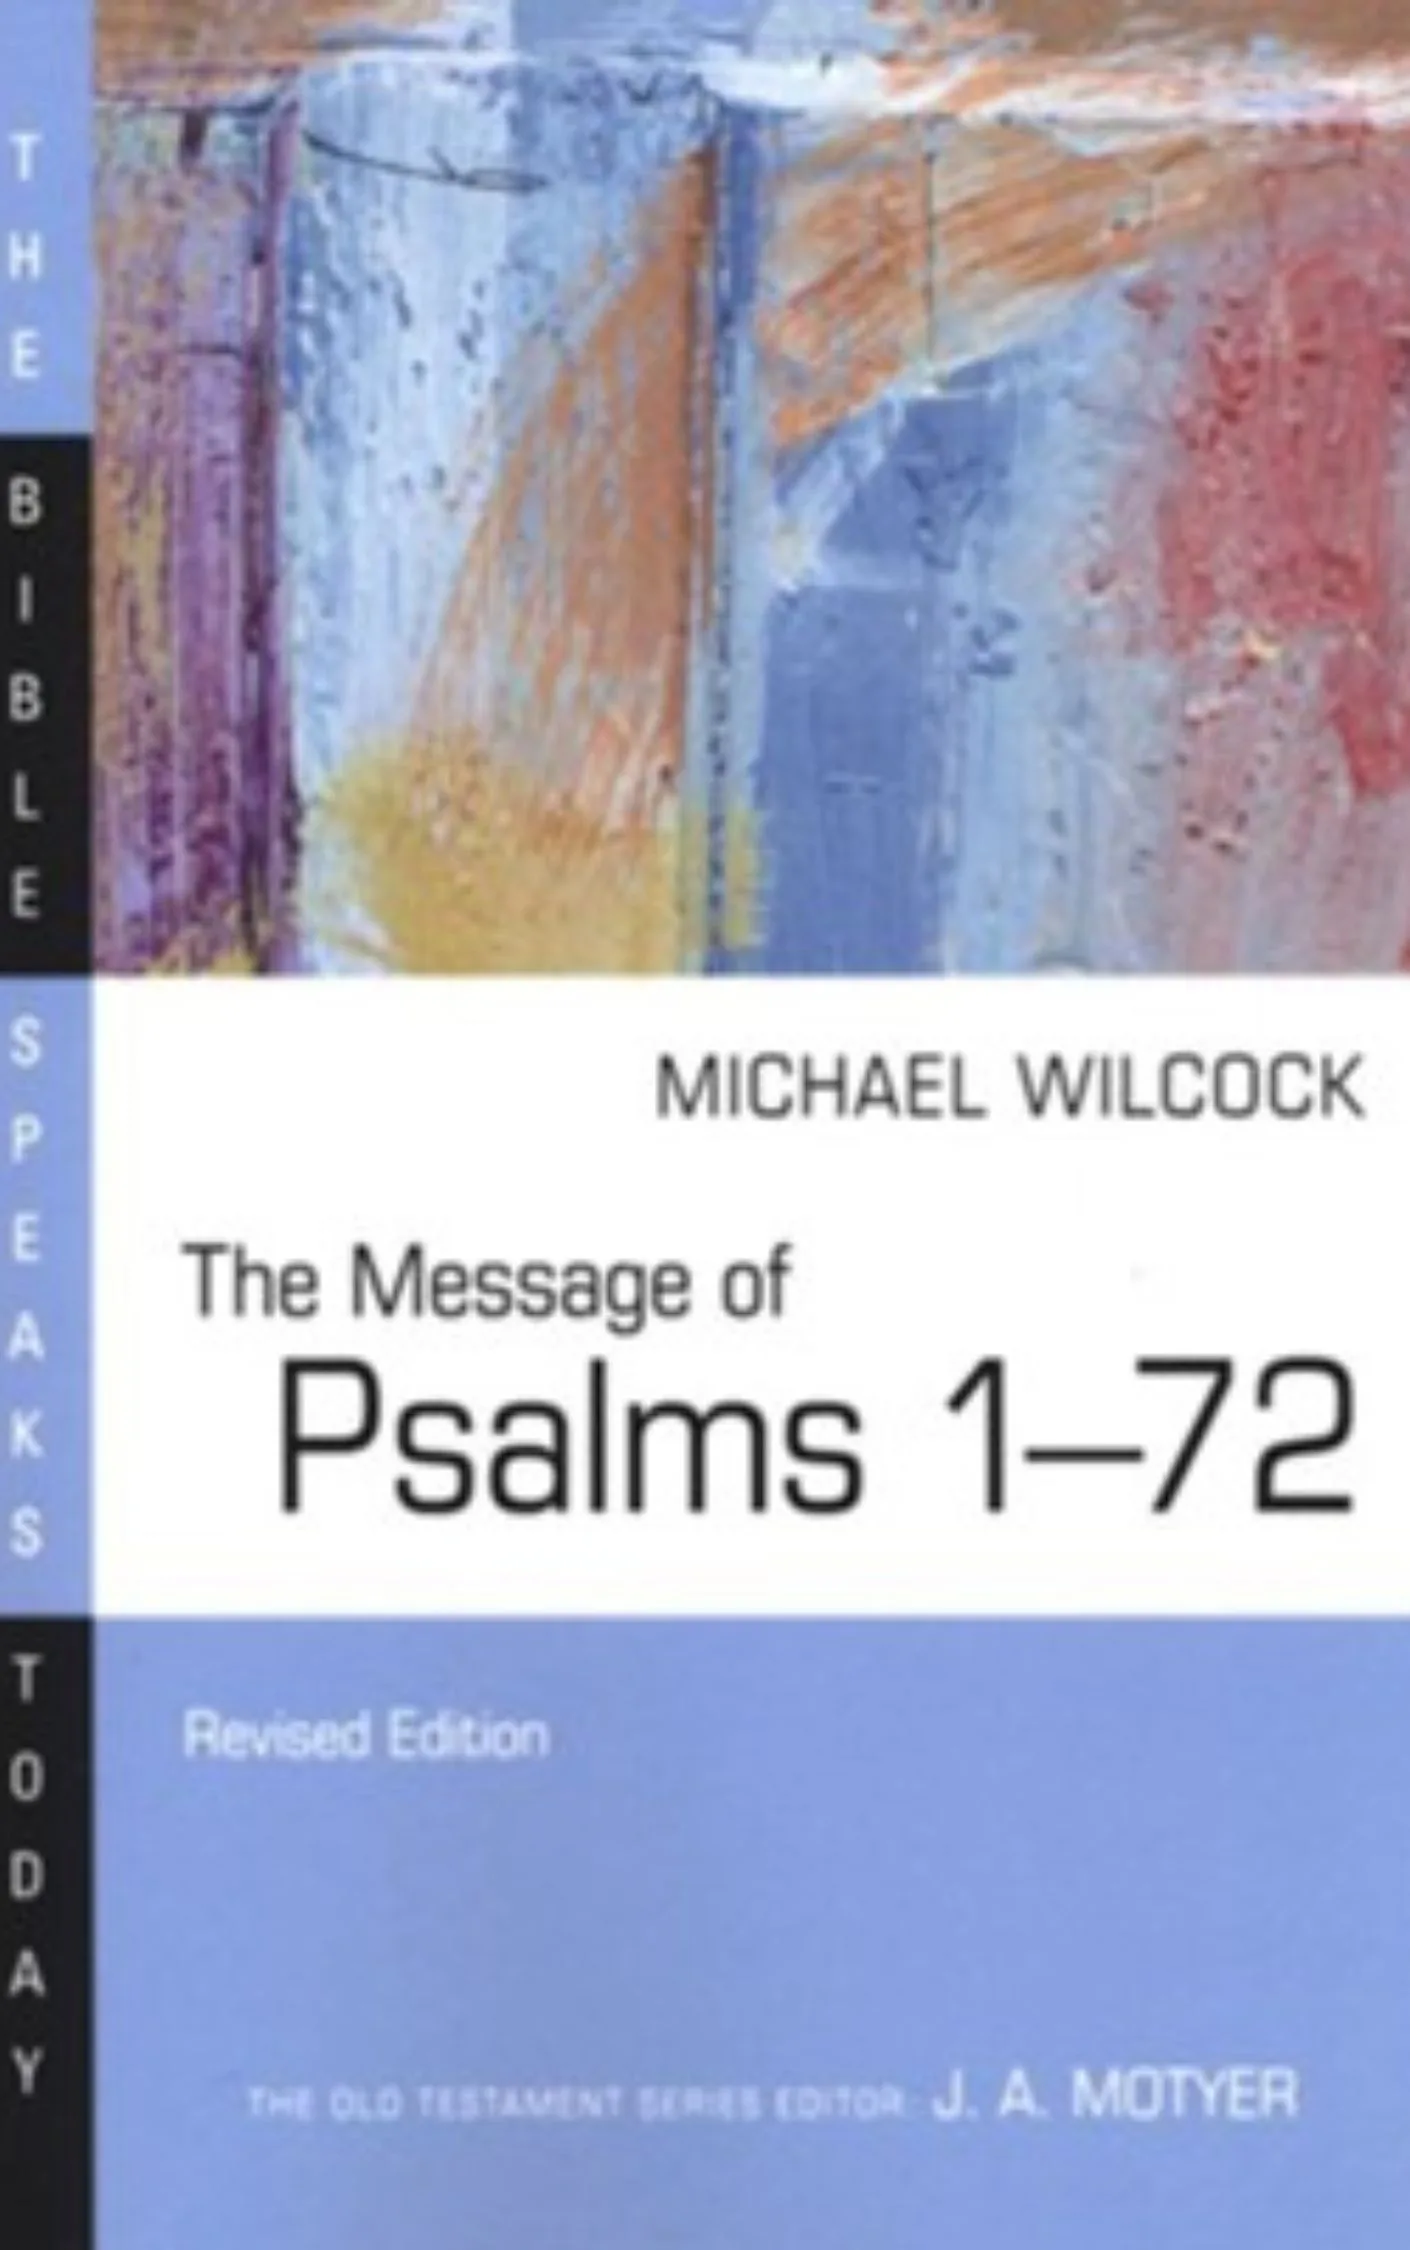 The Message of Psalms: Songs for the People of God by Michael Wilcox